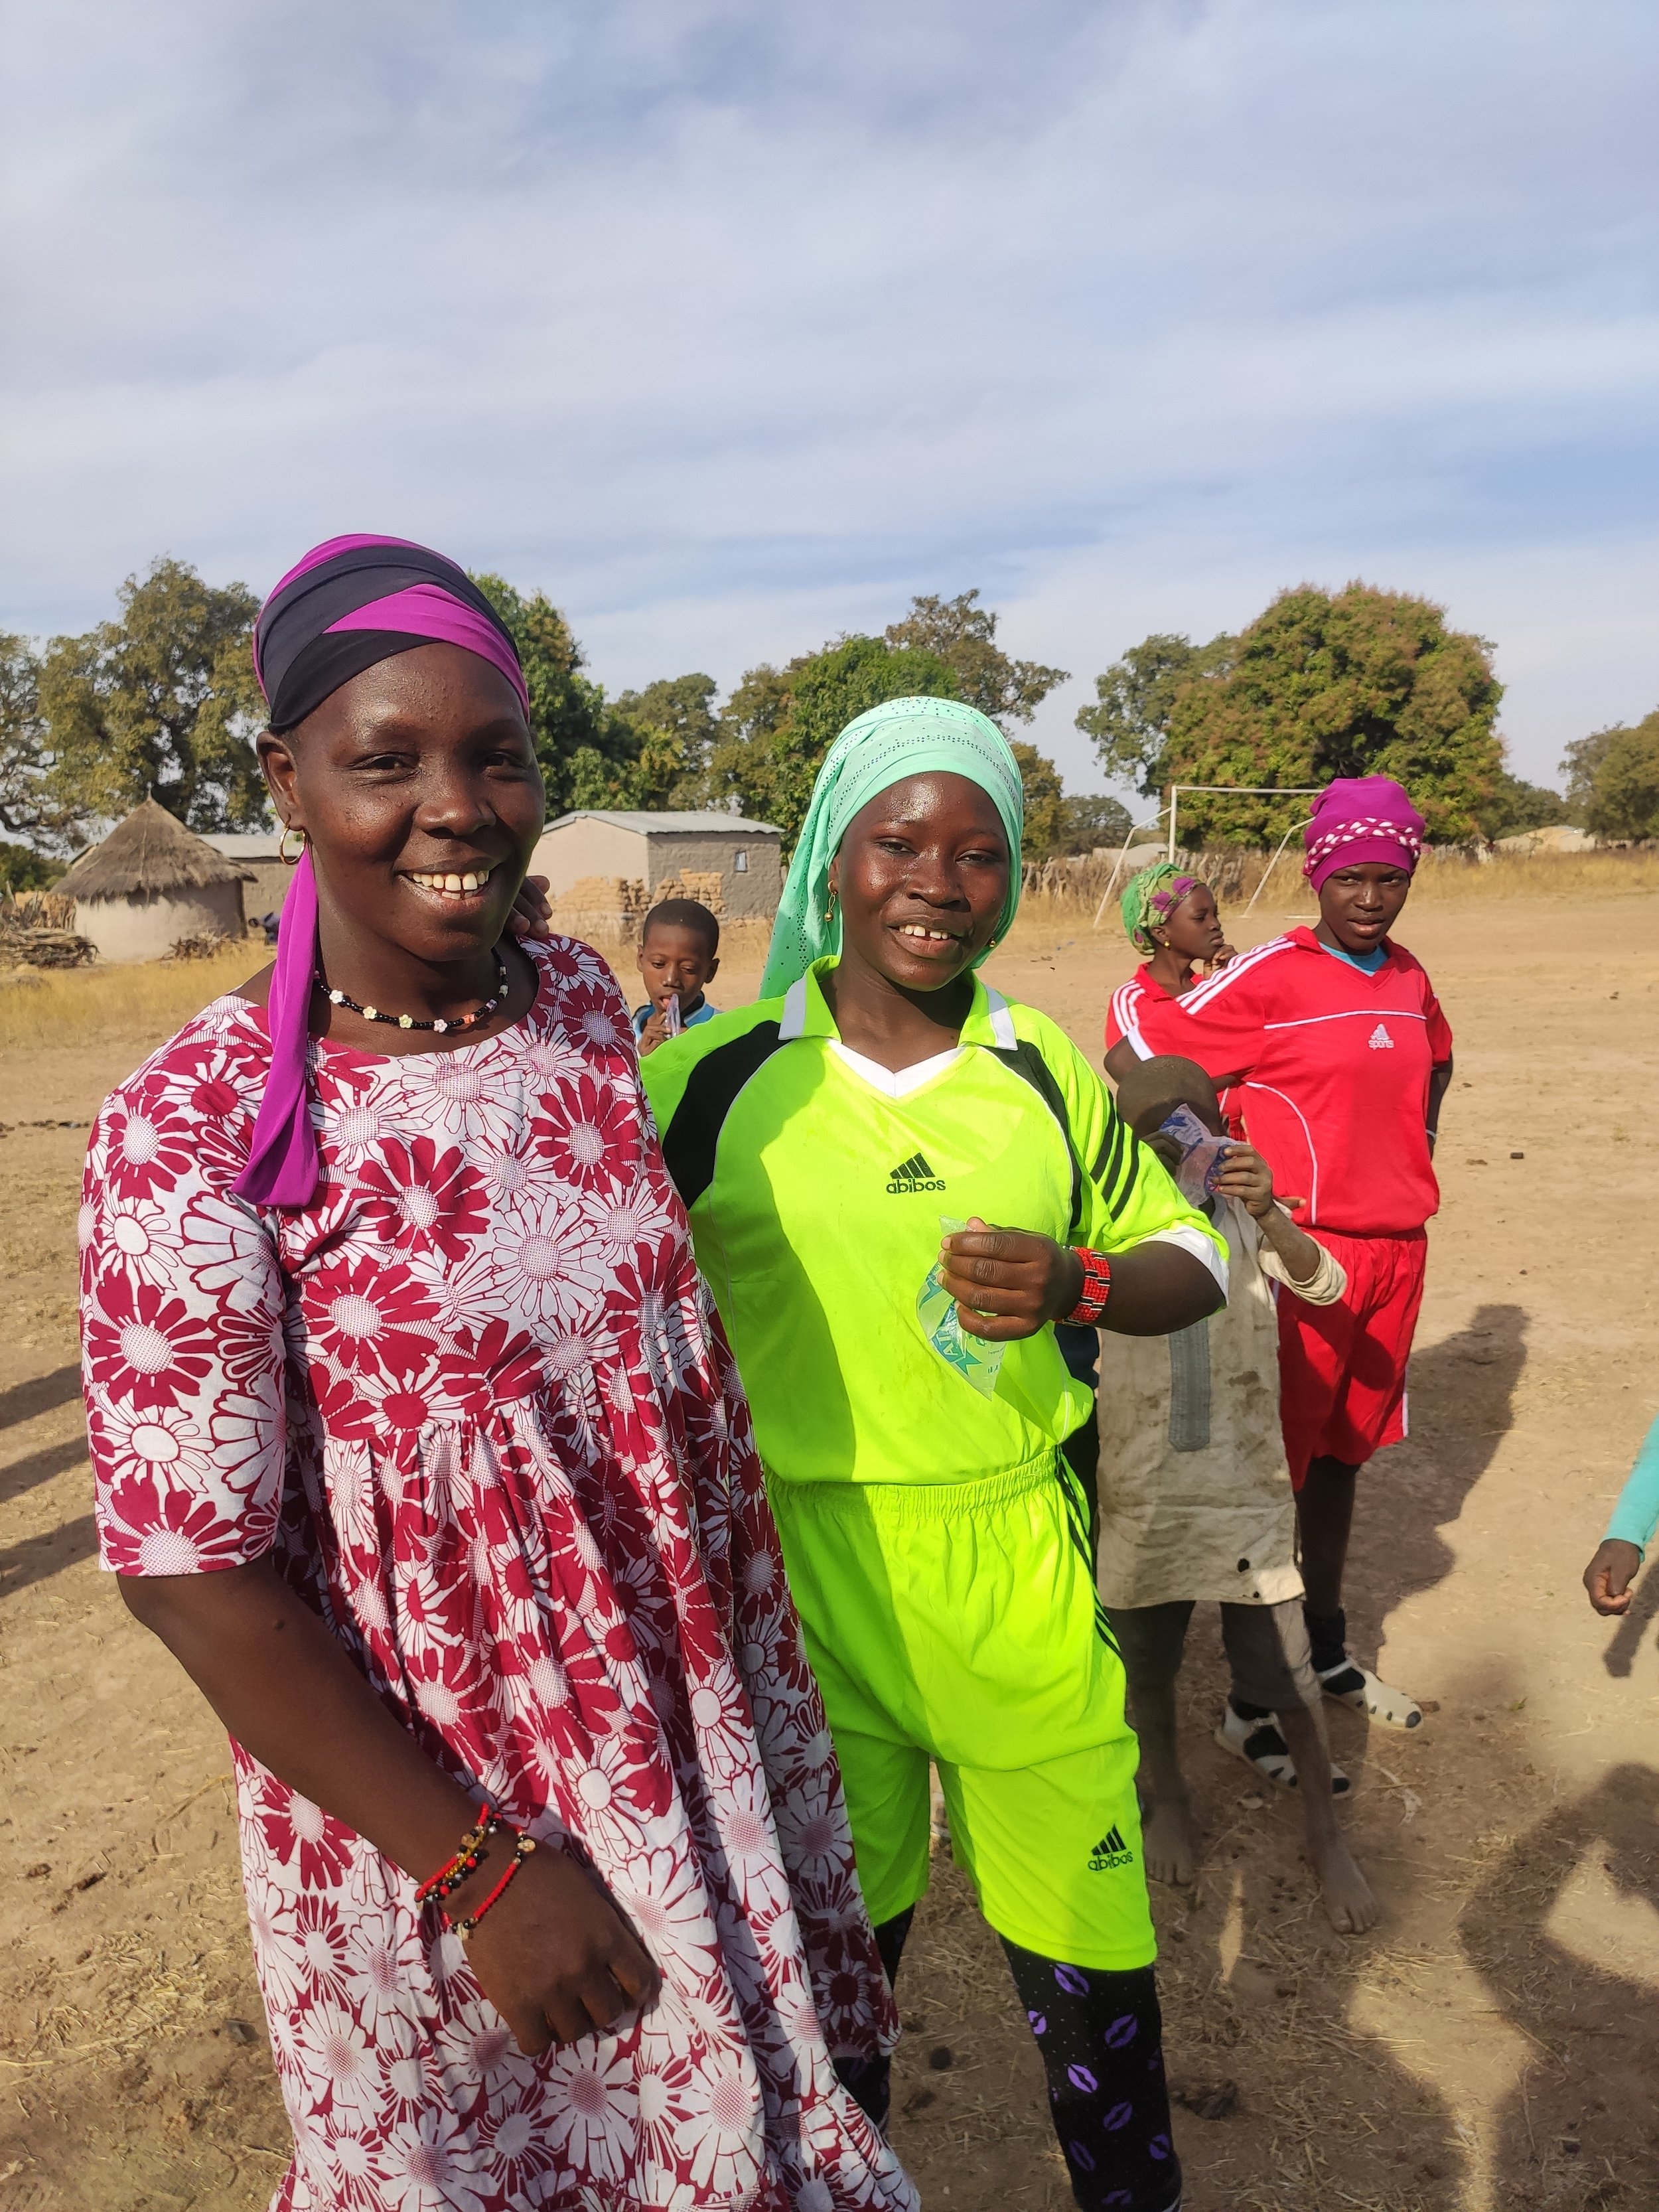 A proud Djenebou poses with her soccer playing daughter.